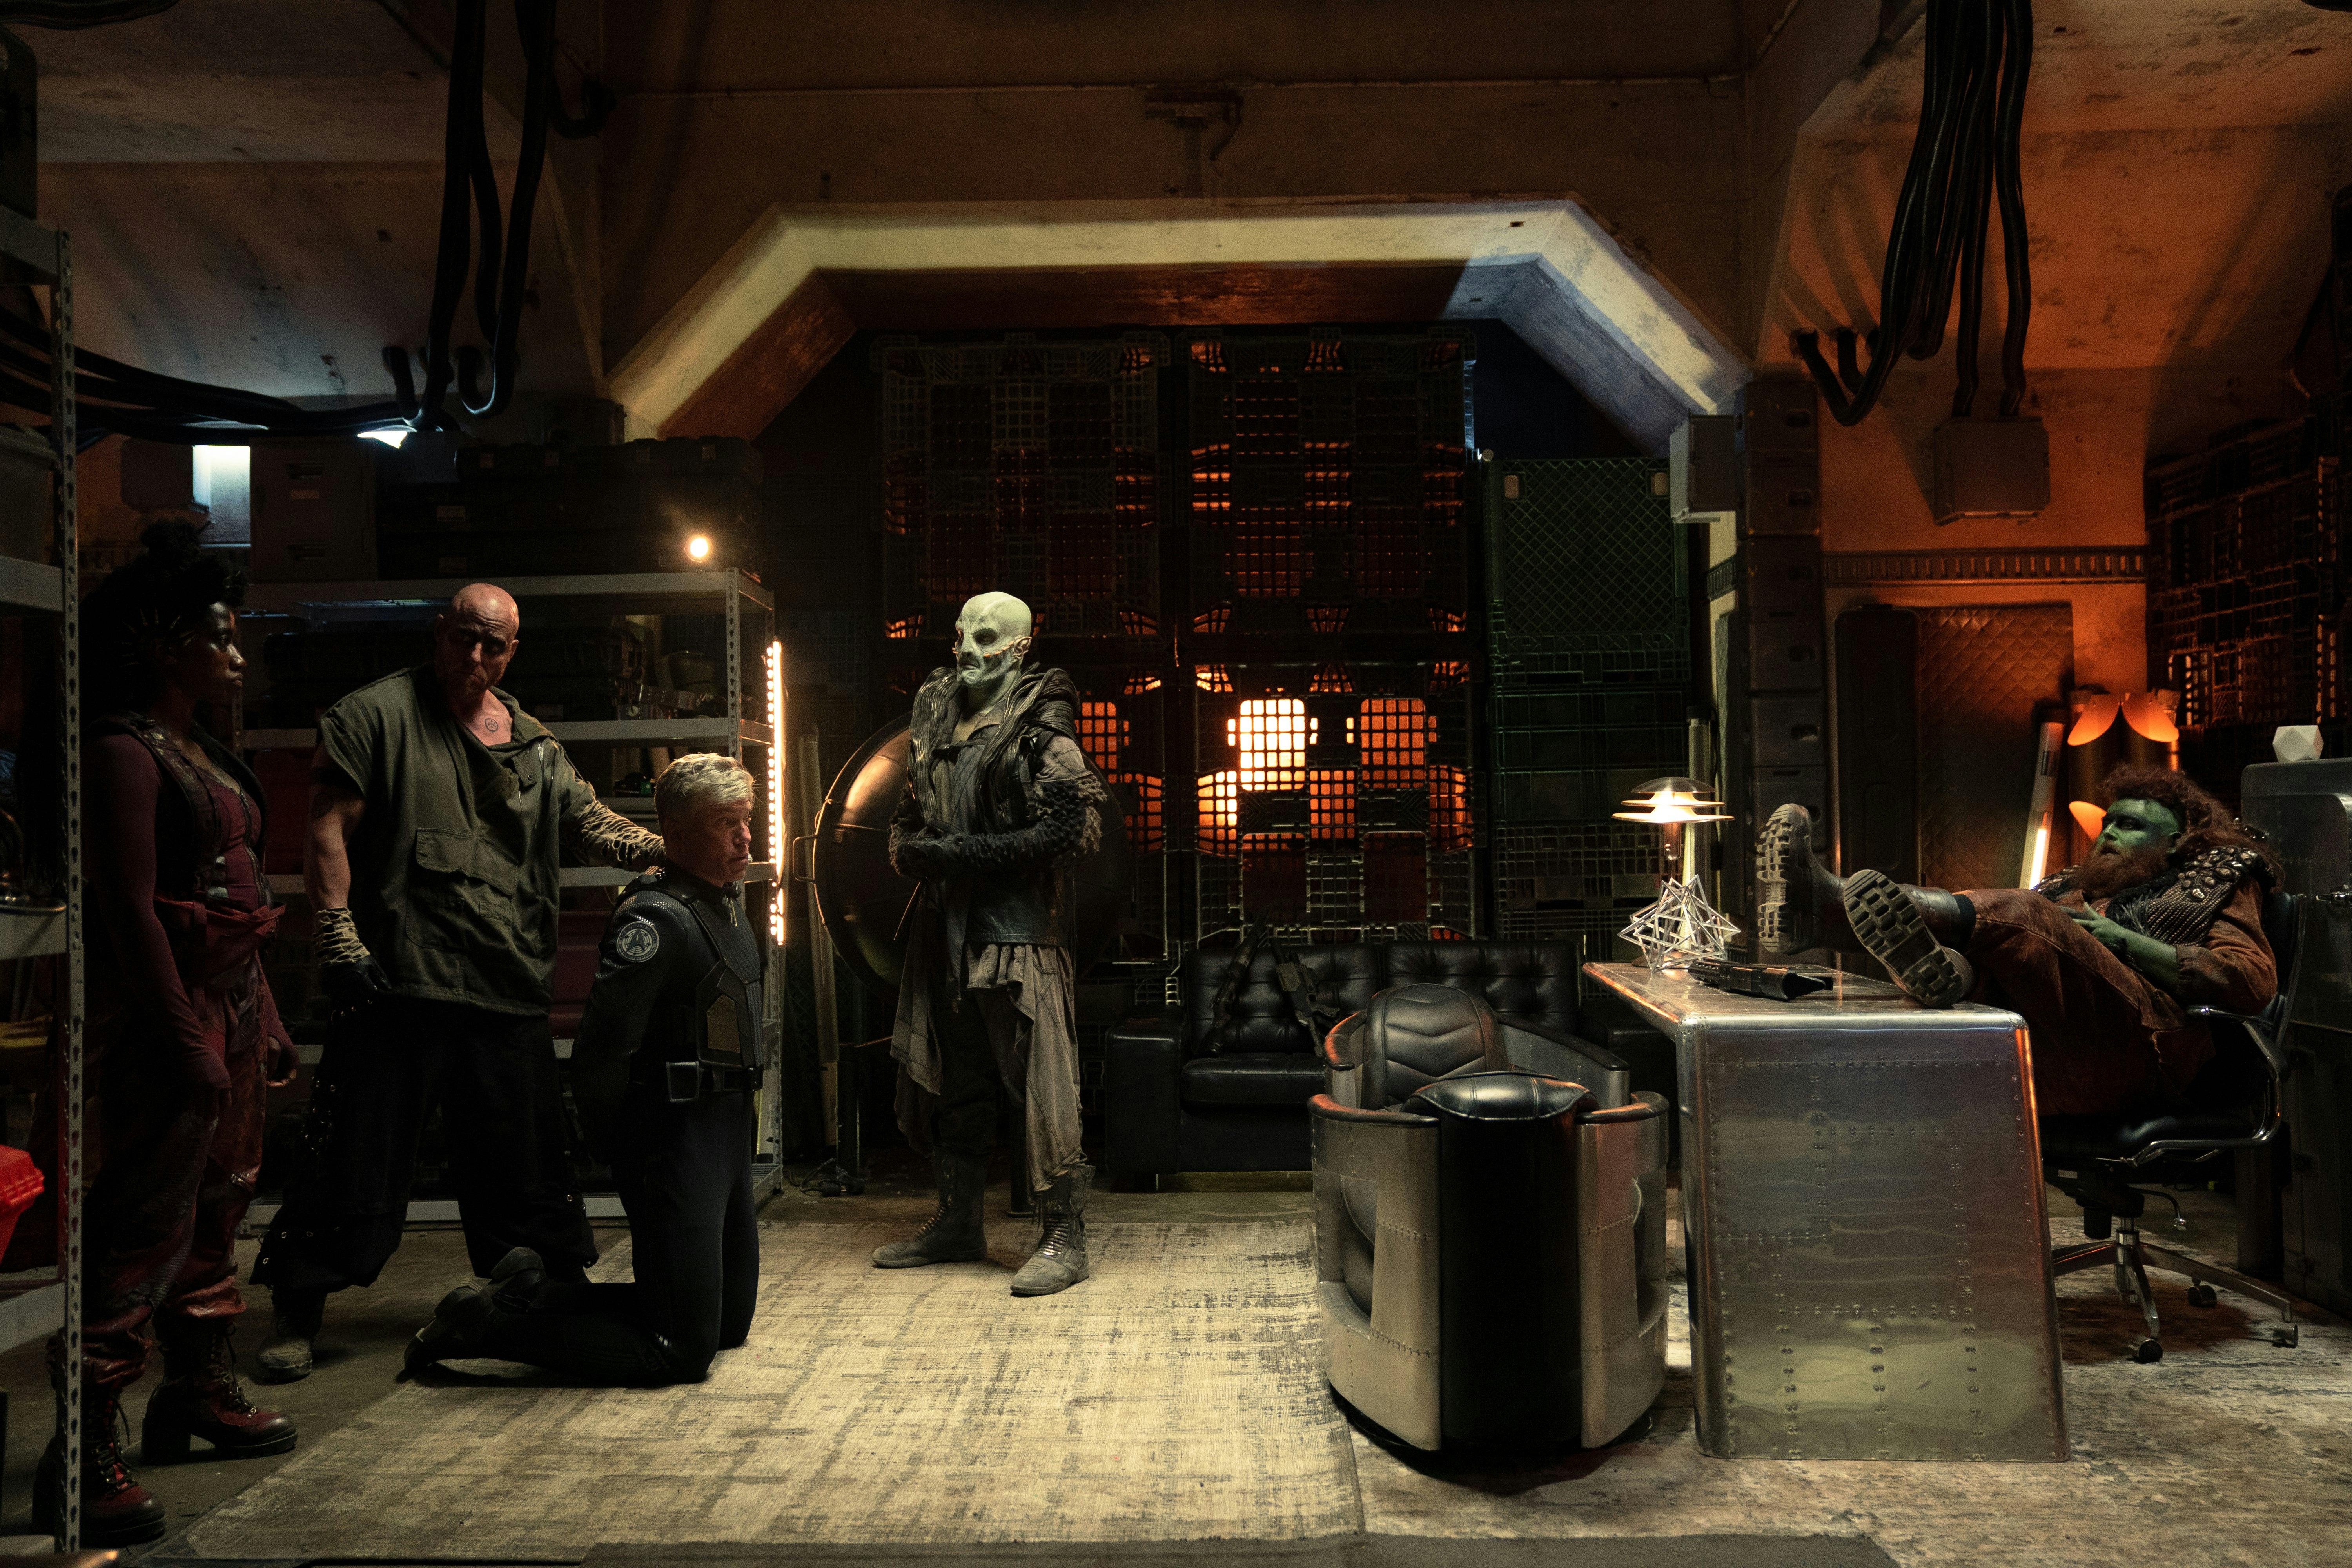 An alien with green skin and an orange beard and hair sits at a desk. Across the room, Pike (Anson Mount) is kneeling next to two alien guards.